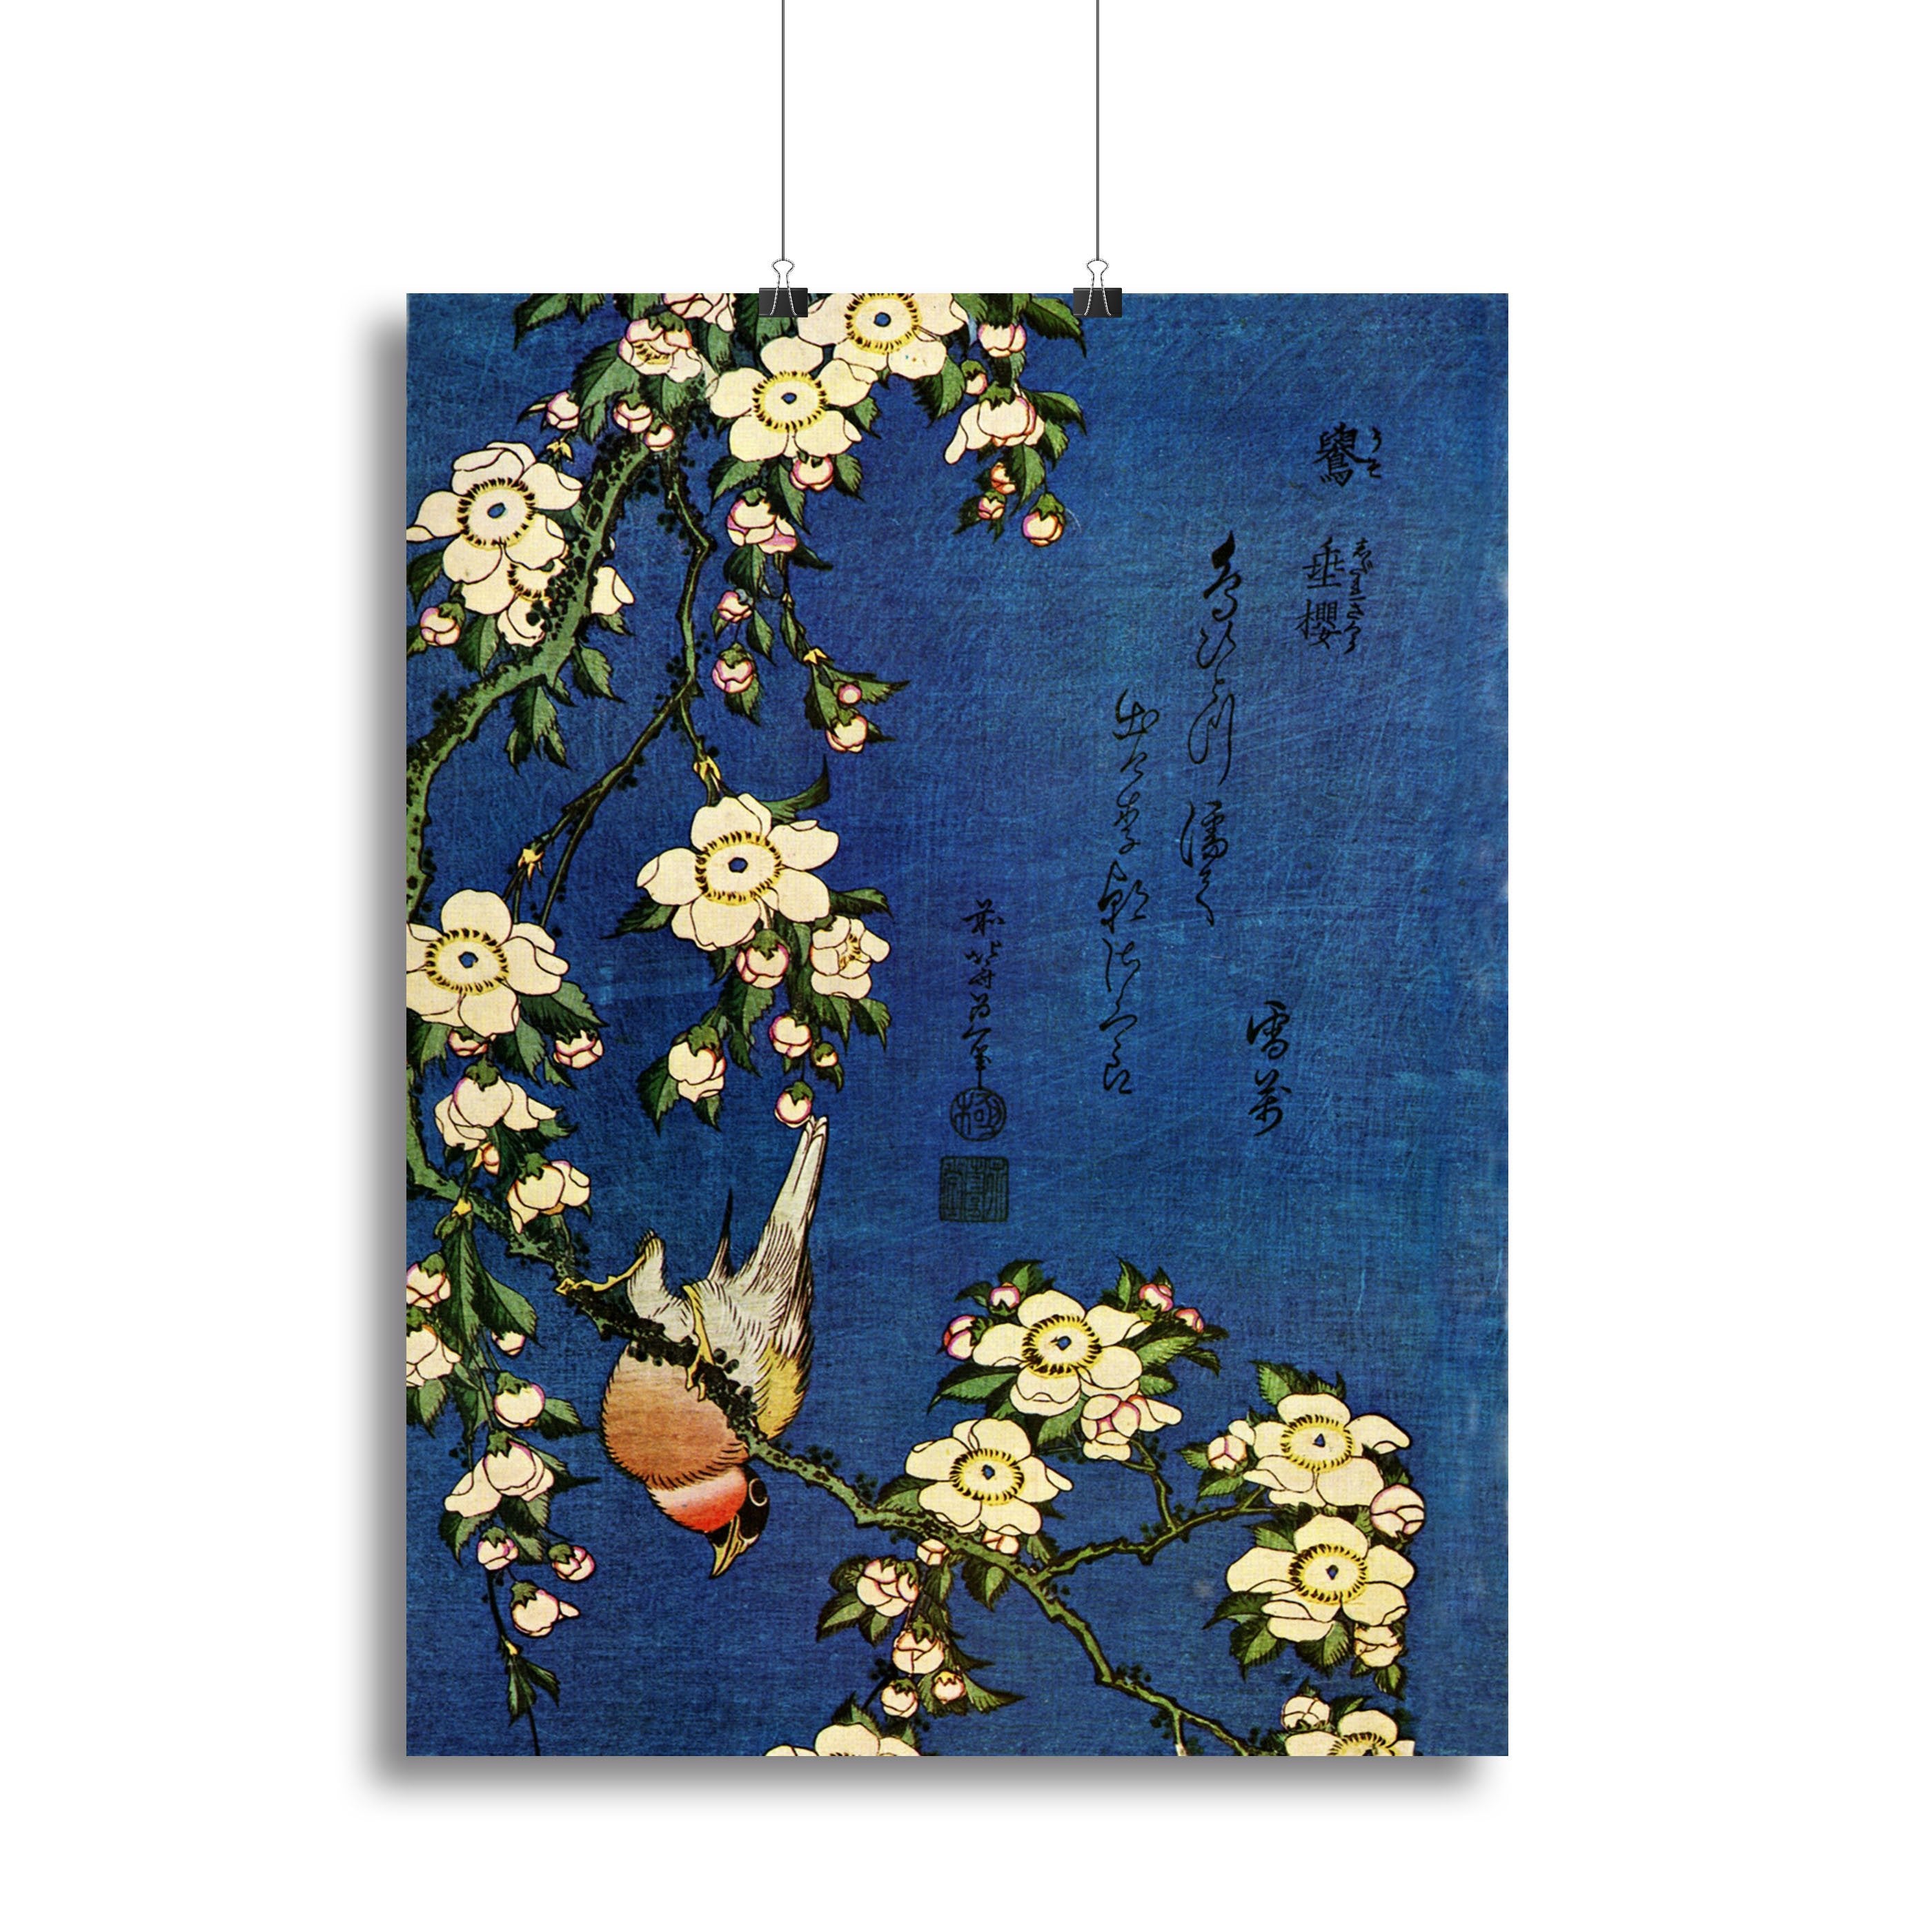 Bullfinch and drooping cherry by Hokusai Canvas Print or Poster